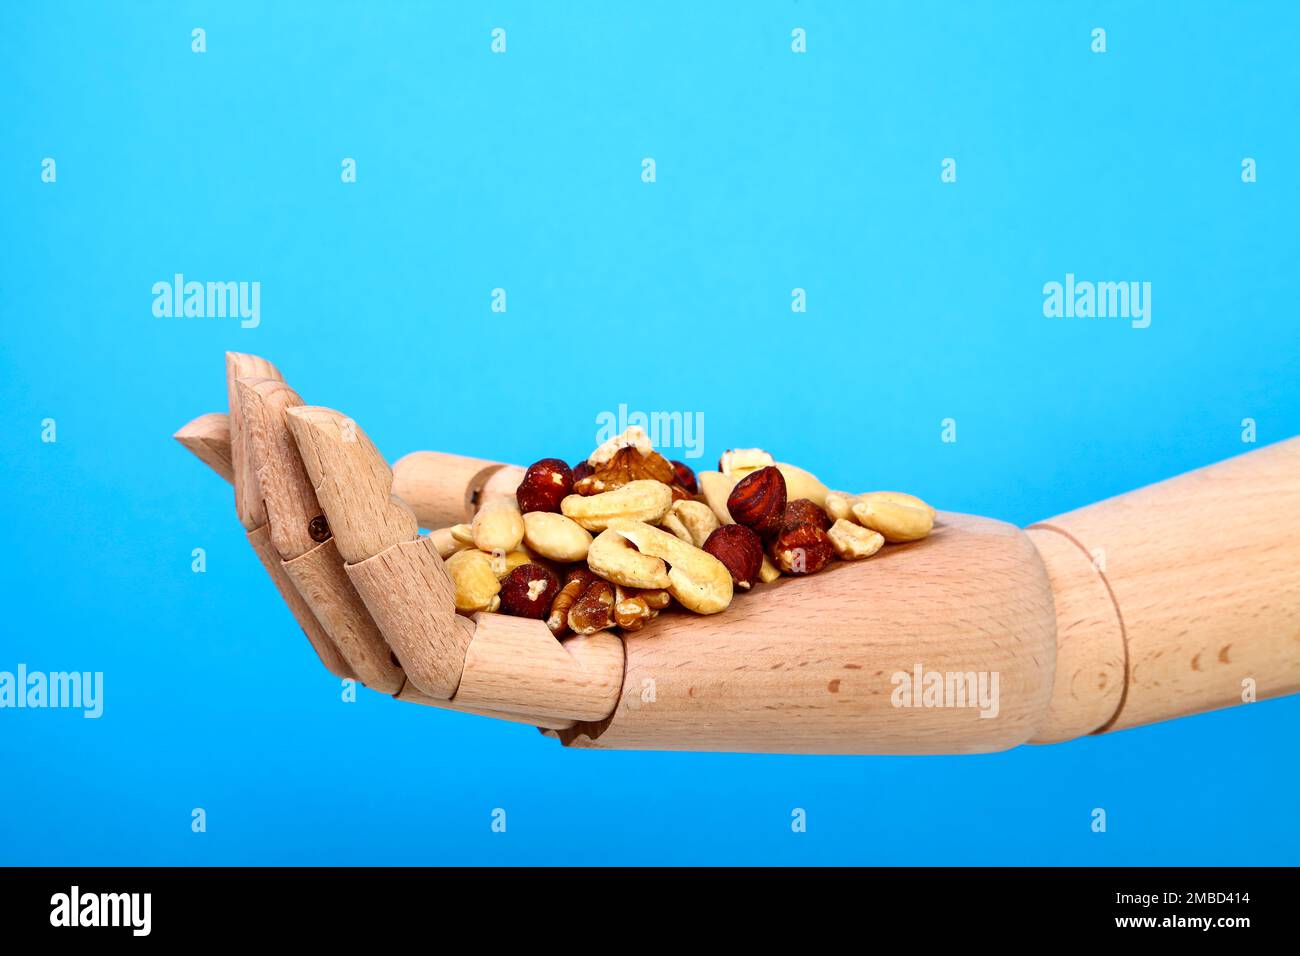 Heap of mixed nuts consisting of Cashew nuts,Hazelnuts,Walnuts and Almonds Stock Photo